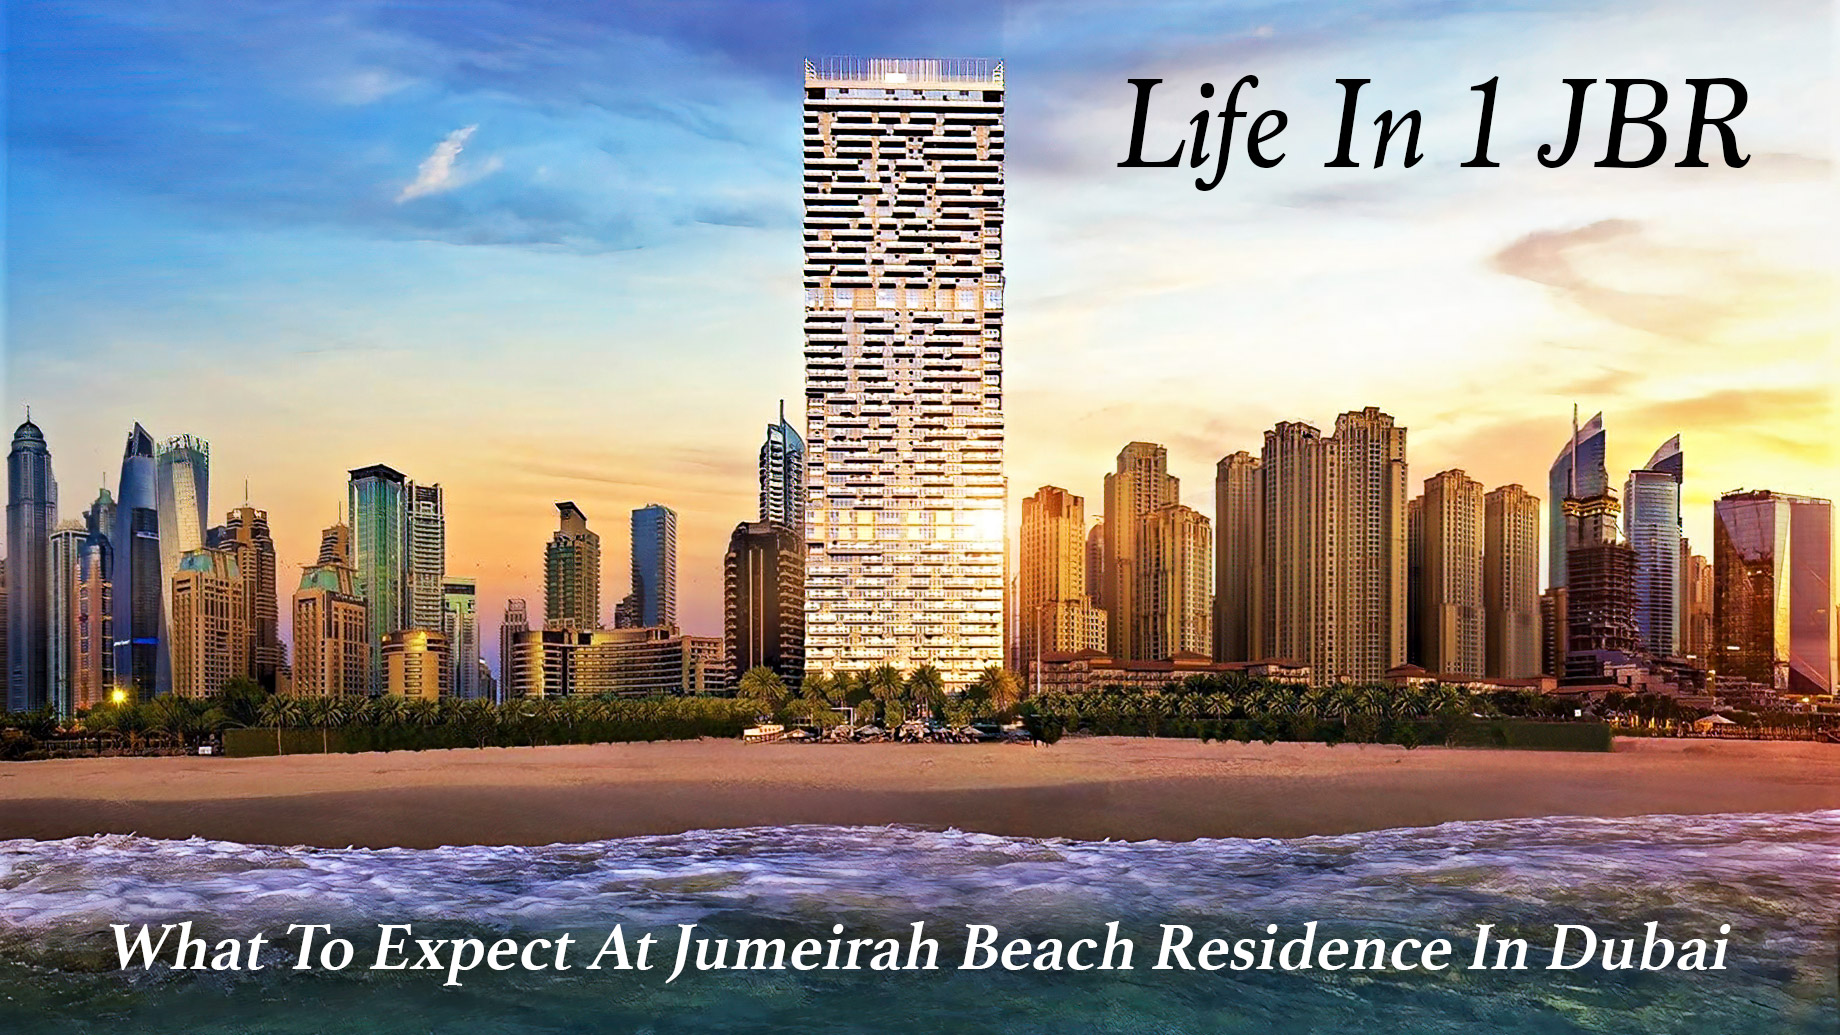 Life In 1 JBR - What To Expect At Jumeirah Beach Residence In Dubai